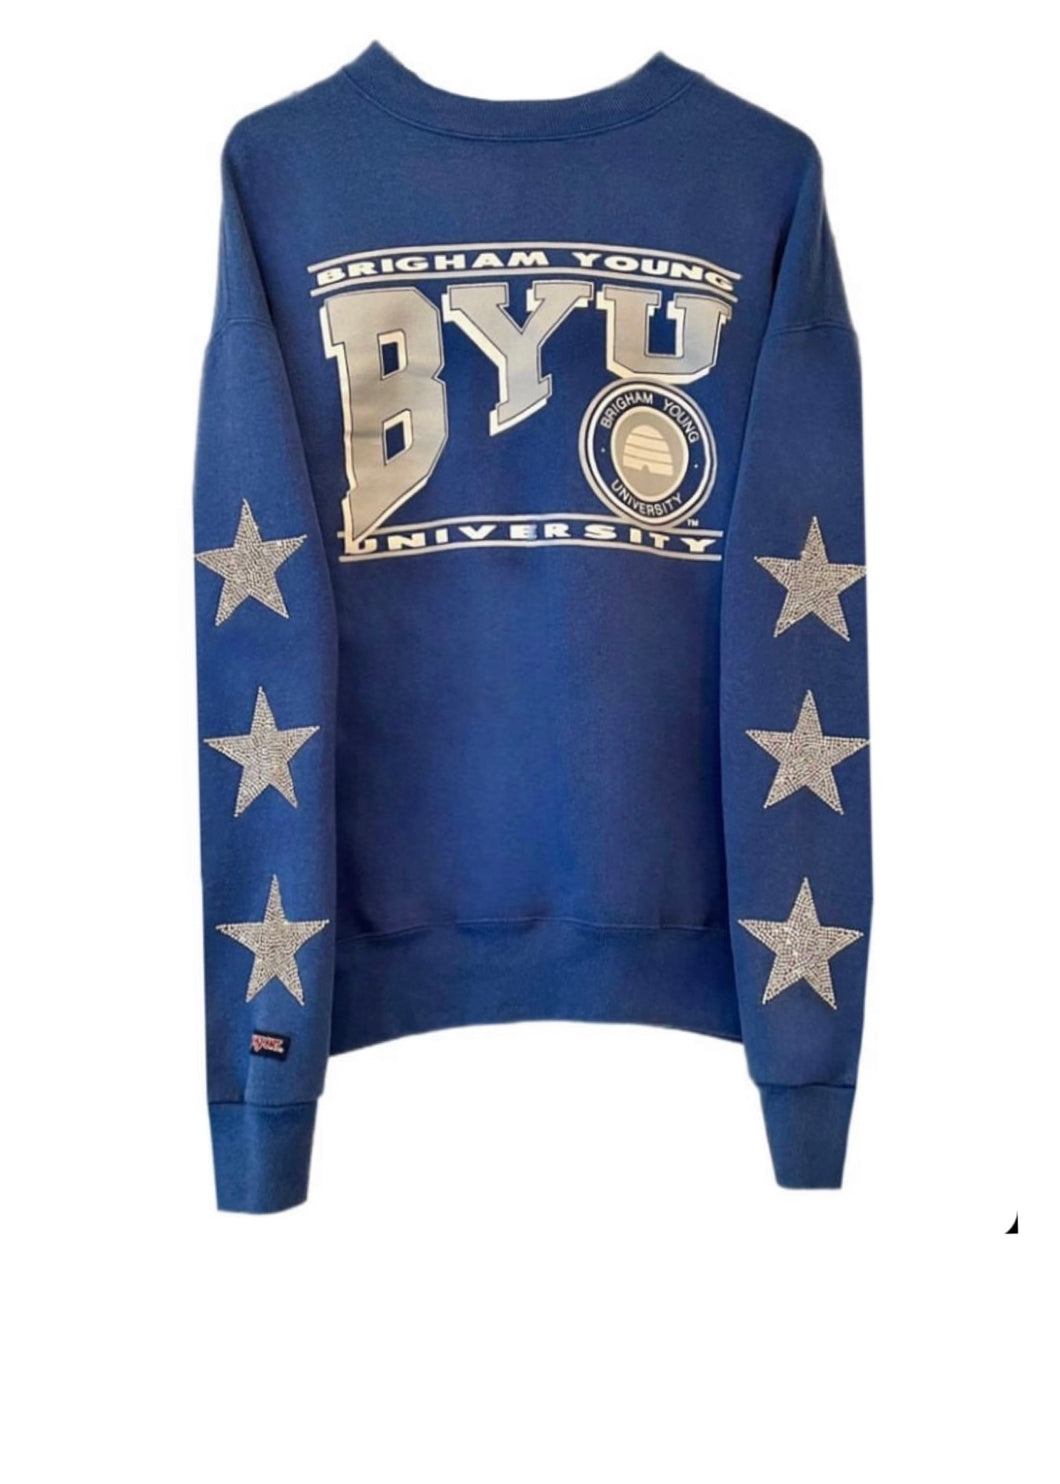 Brigham Young University, One of a KIND Vintage BYU Cougars Sweatshirt with Three Crystal Star Design.